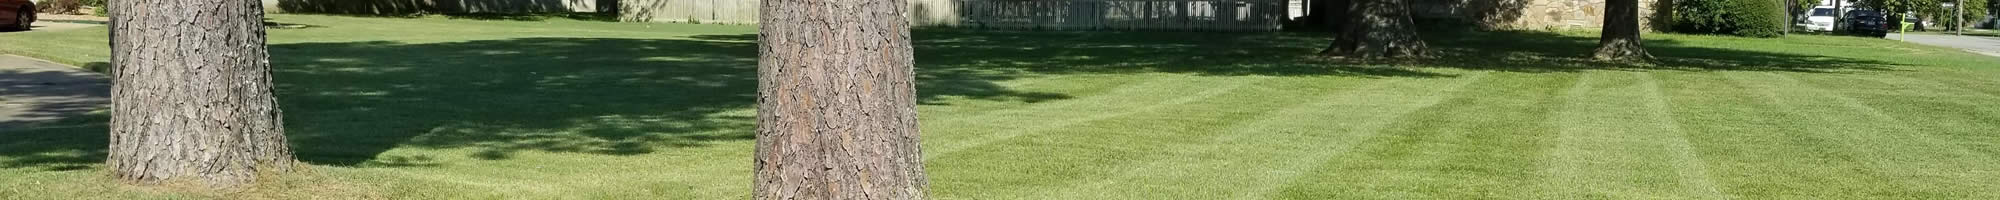 Lawn Care Landscaping Services Corning